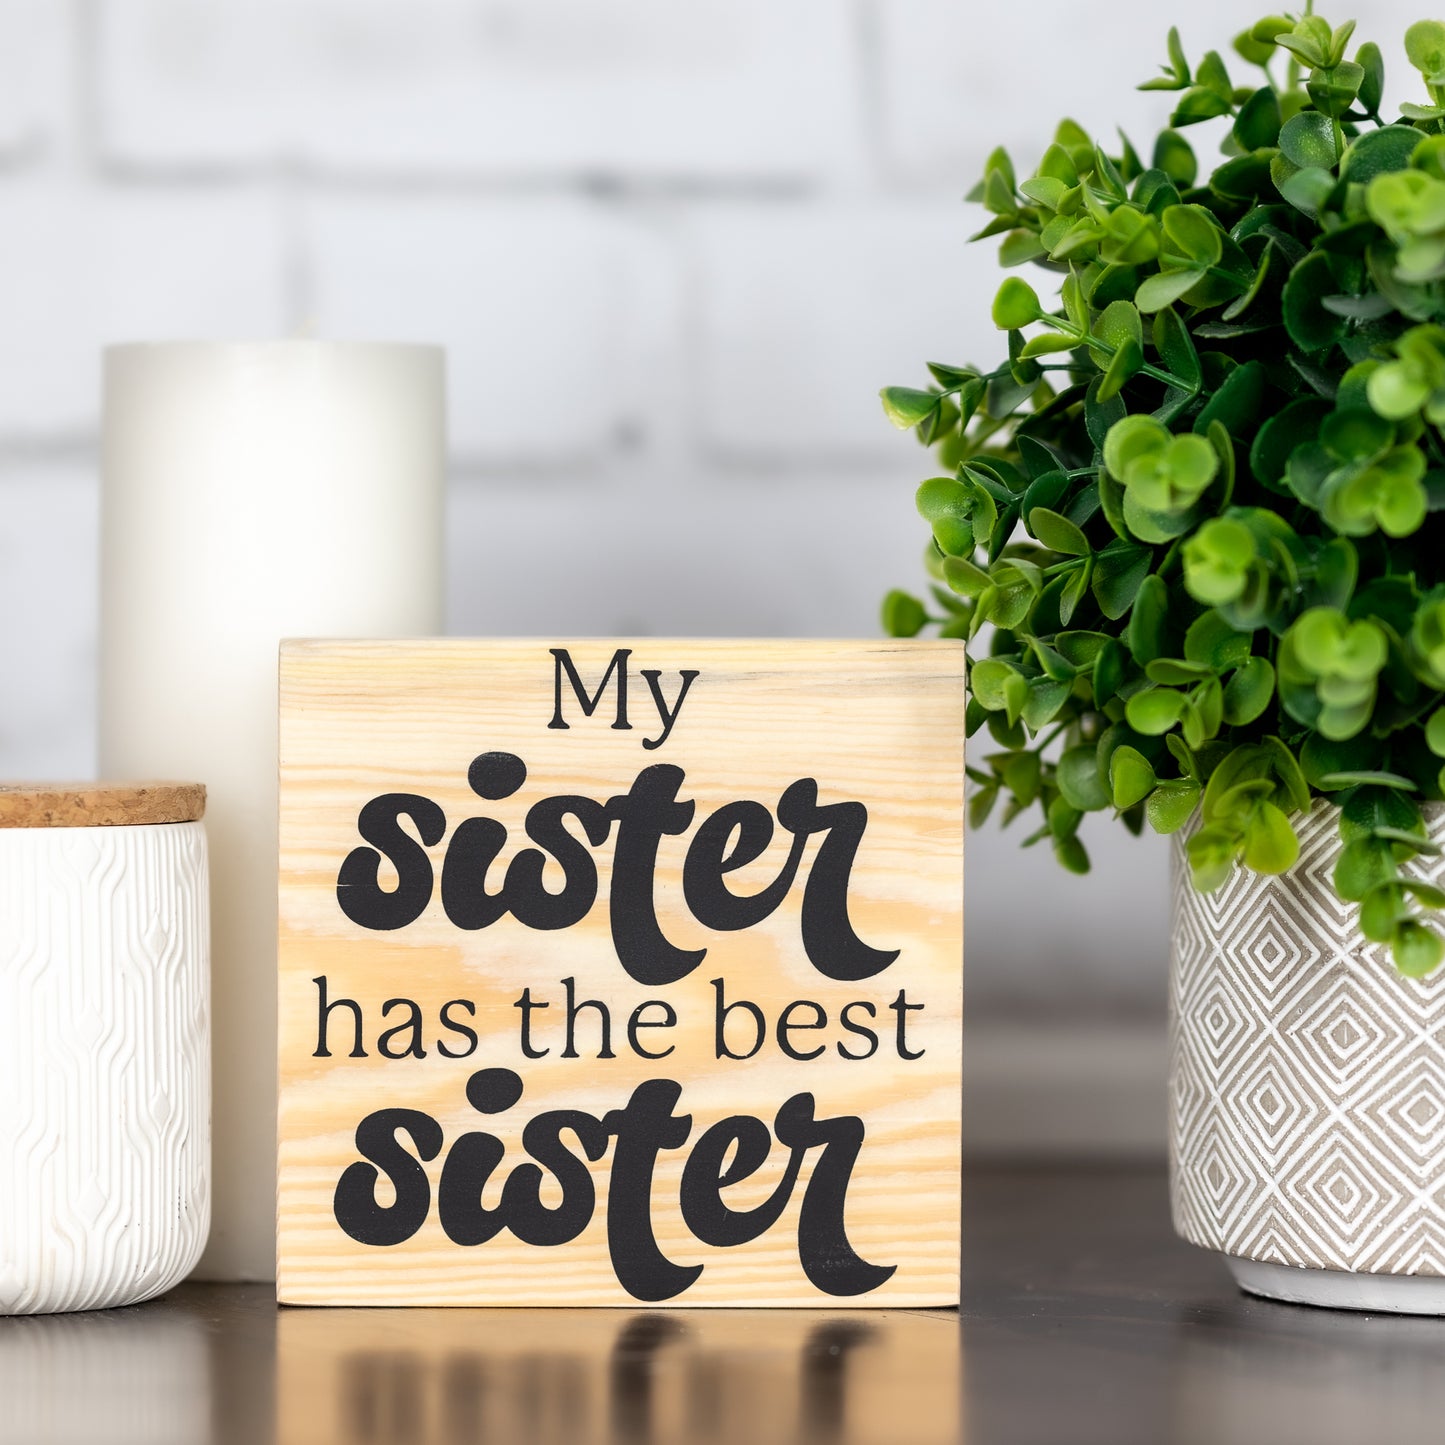 my sister has the best sister ~ shelf block sign